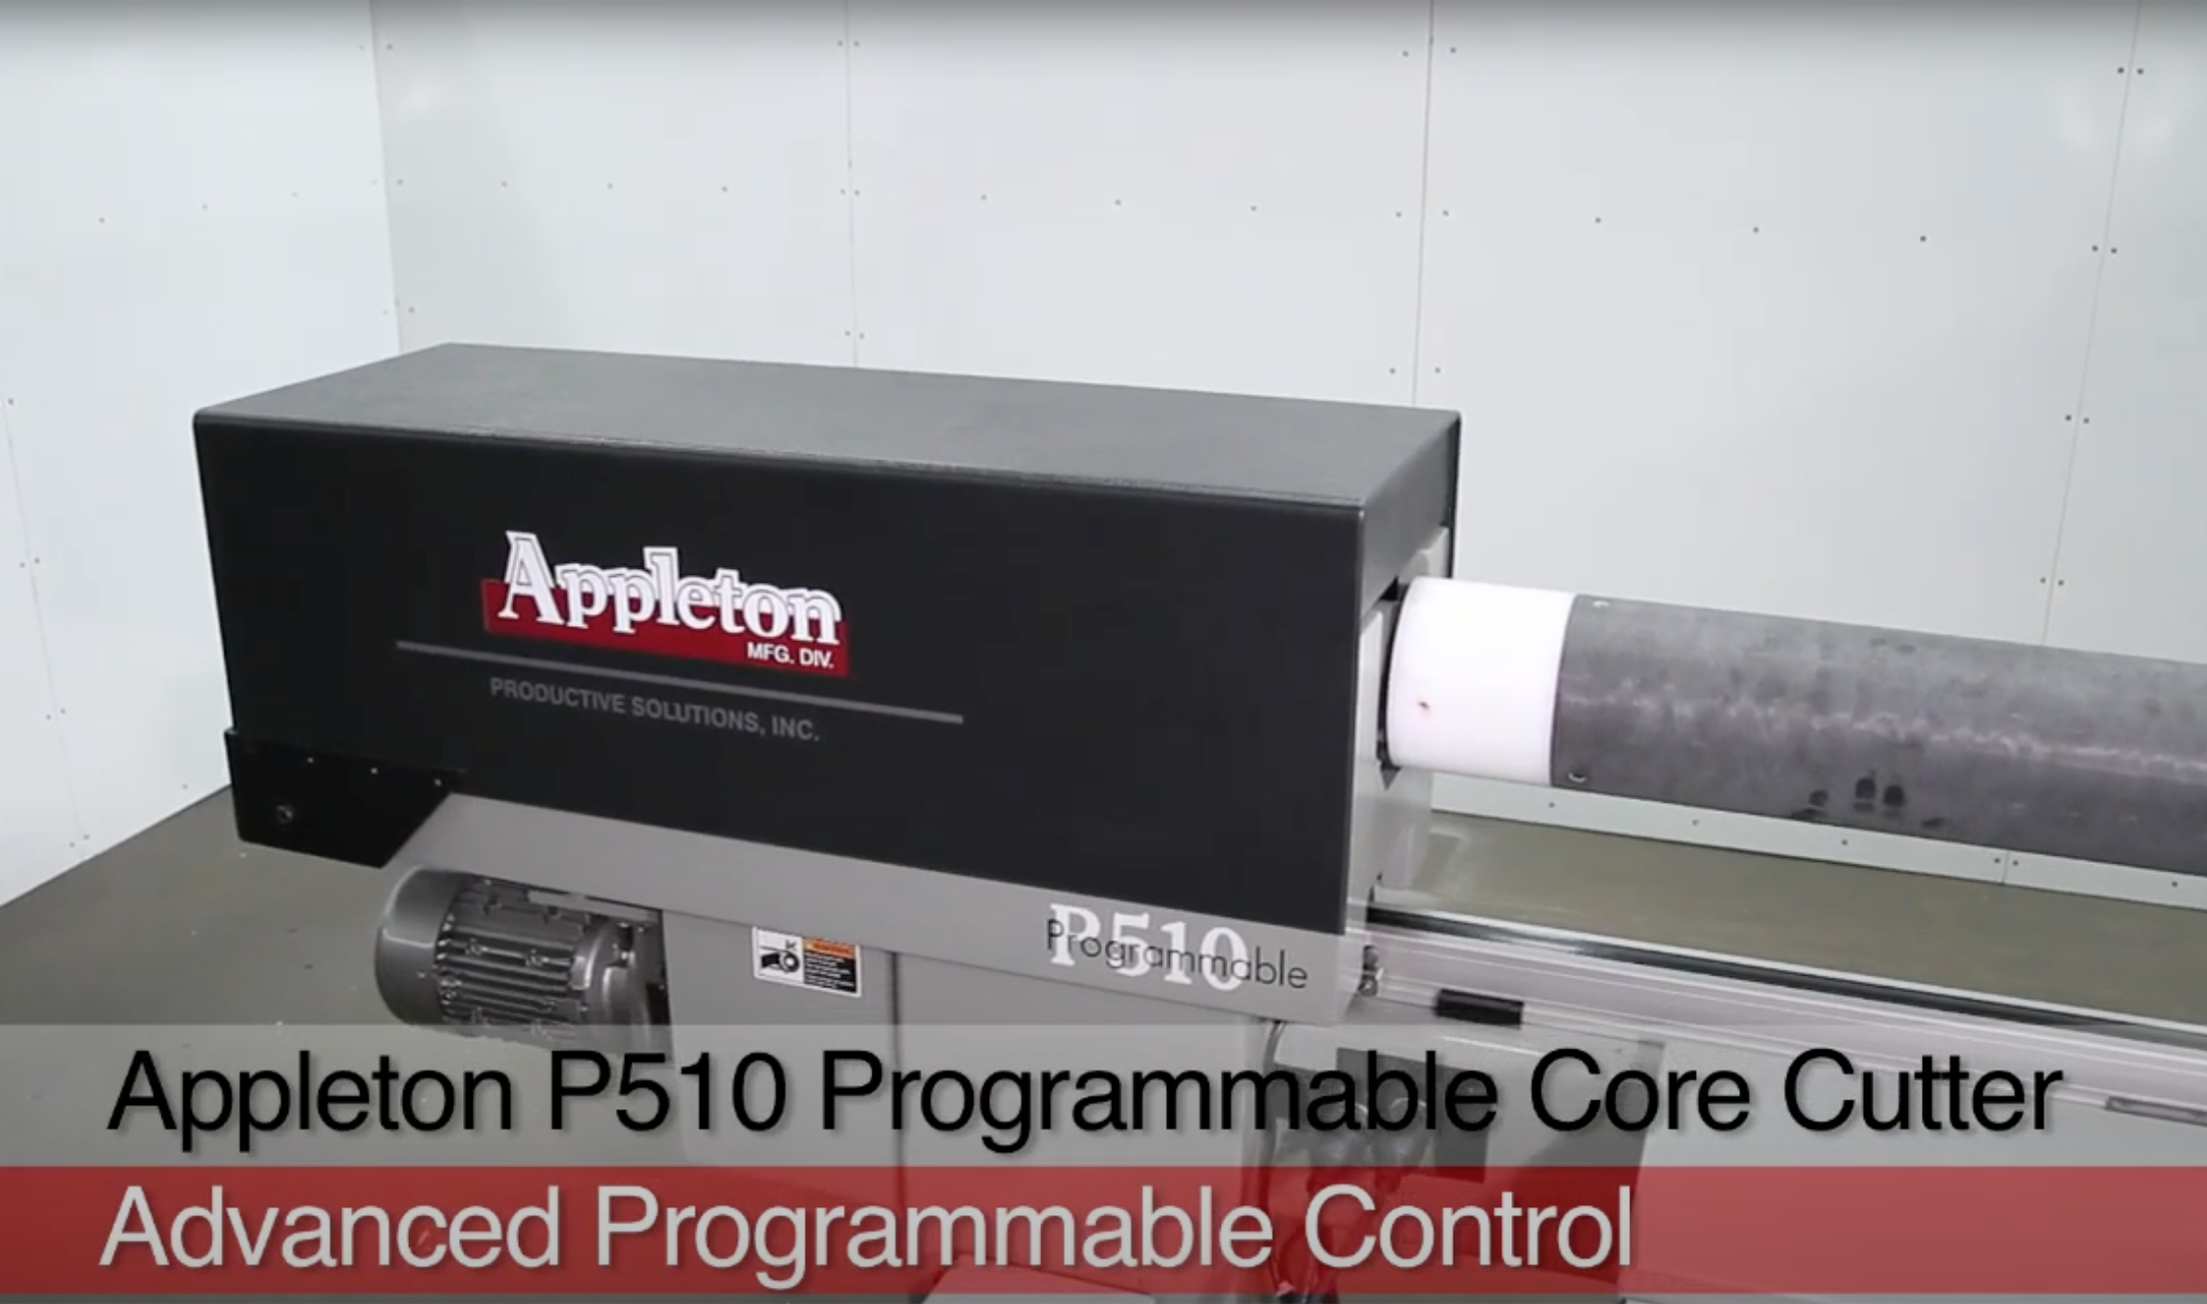 Appleton P510 Core Cutter Overview